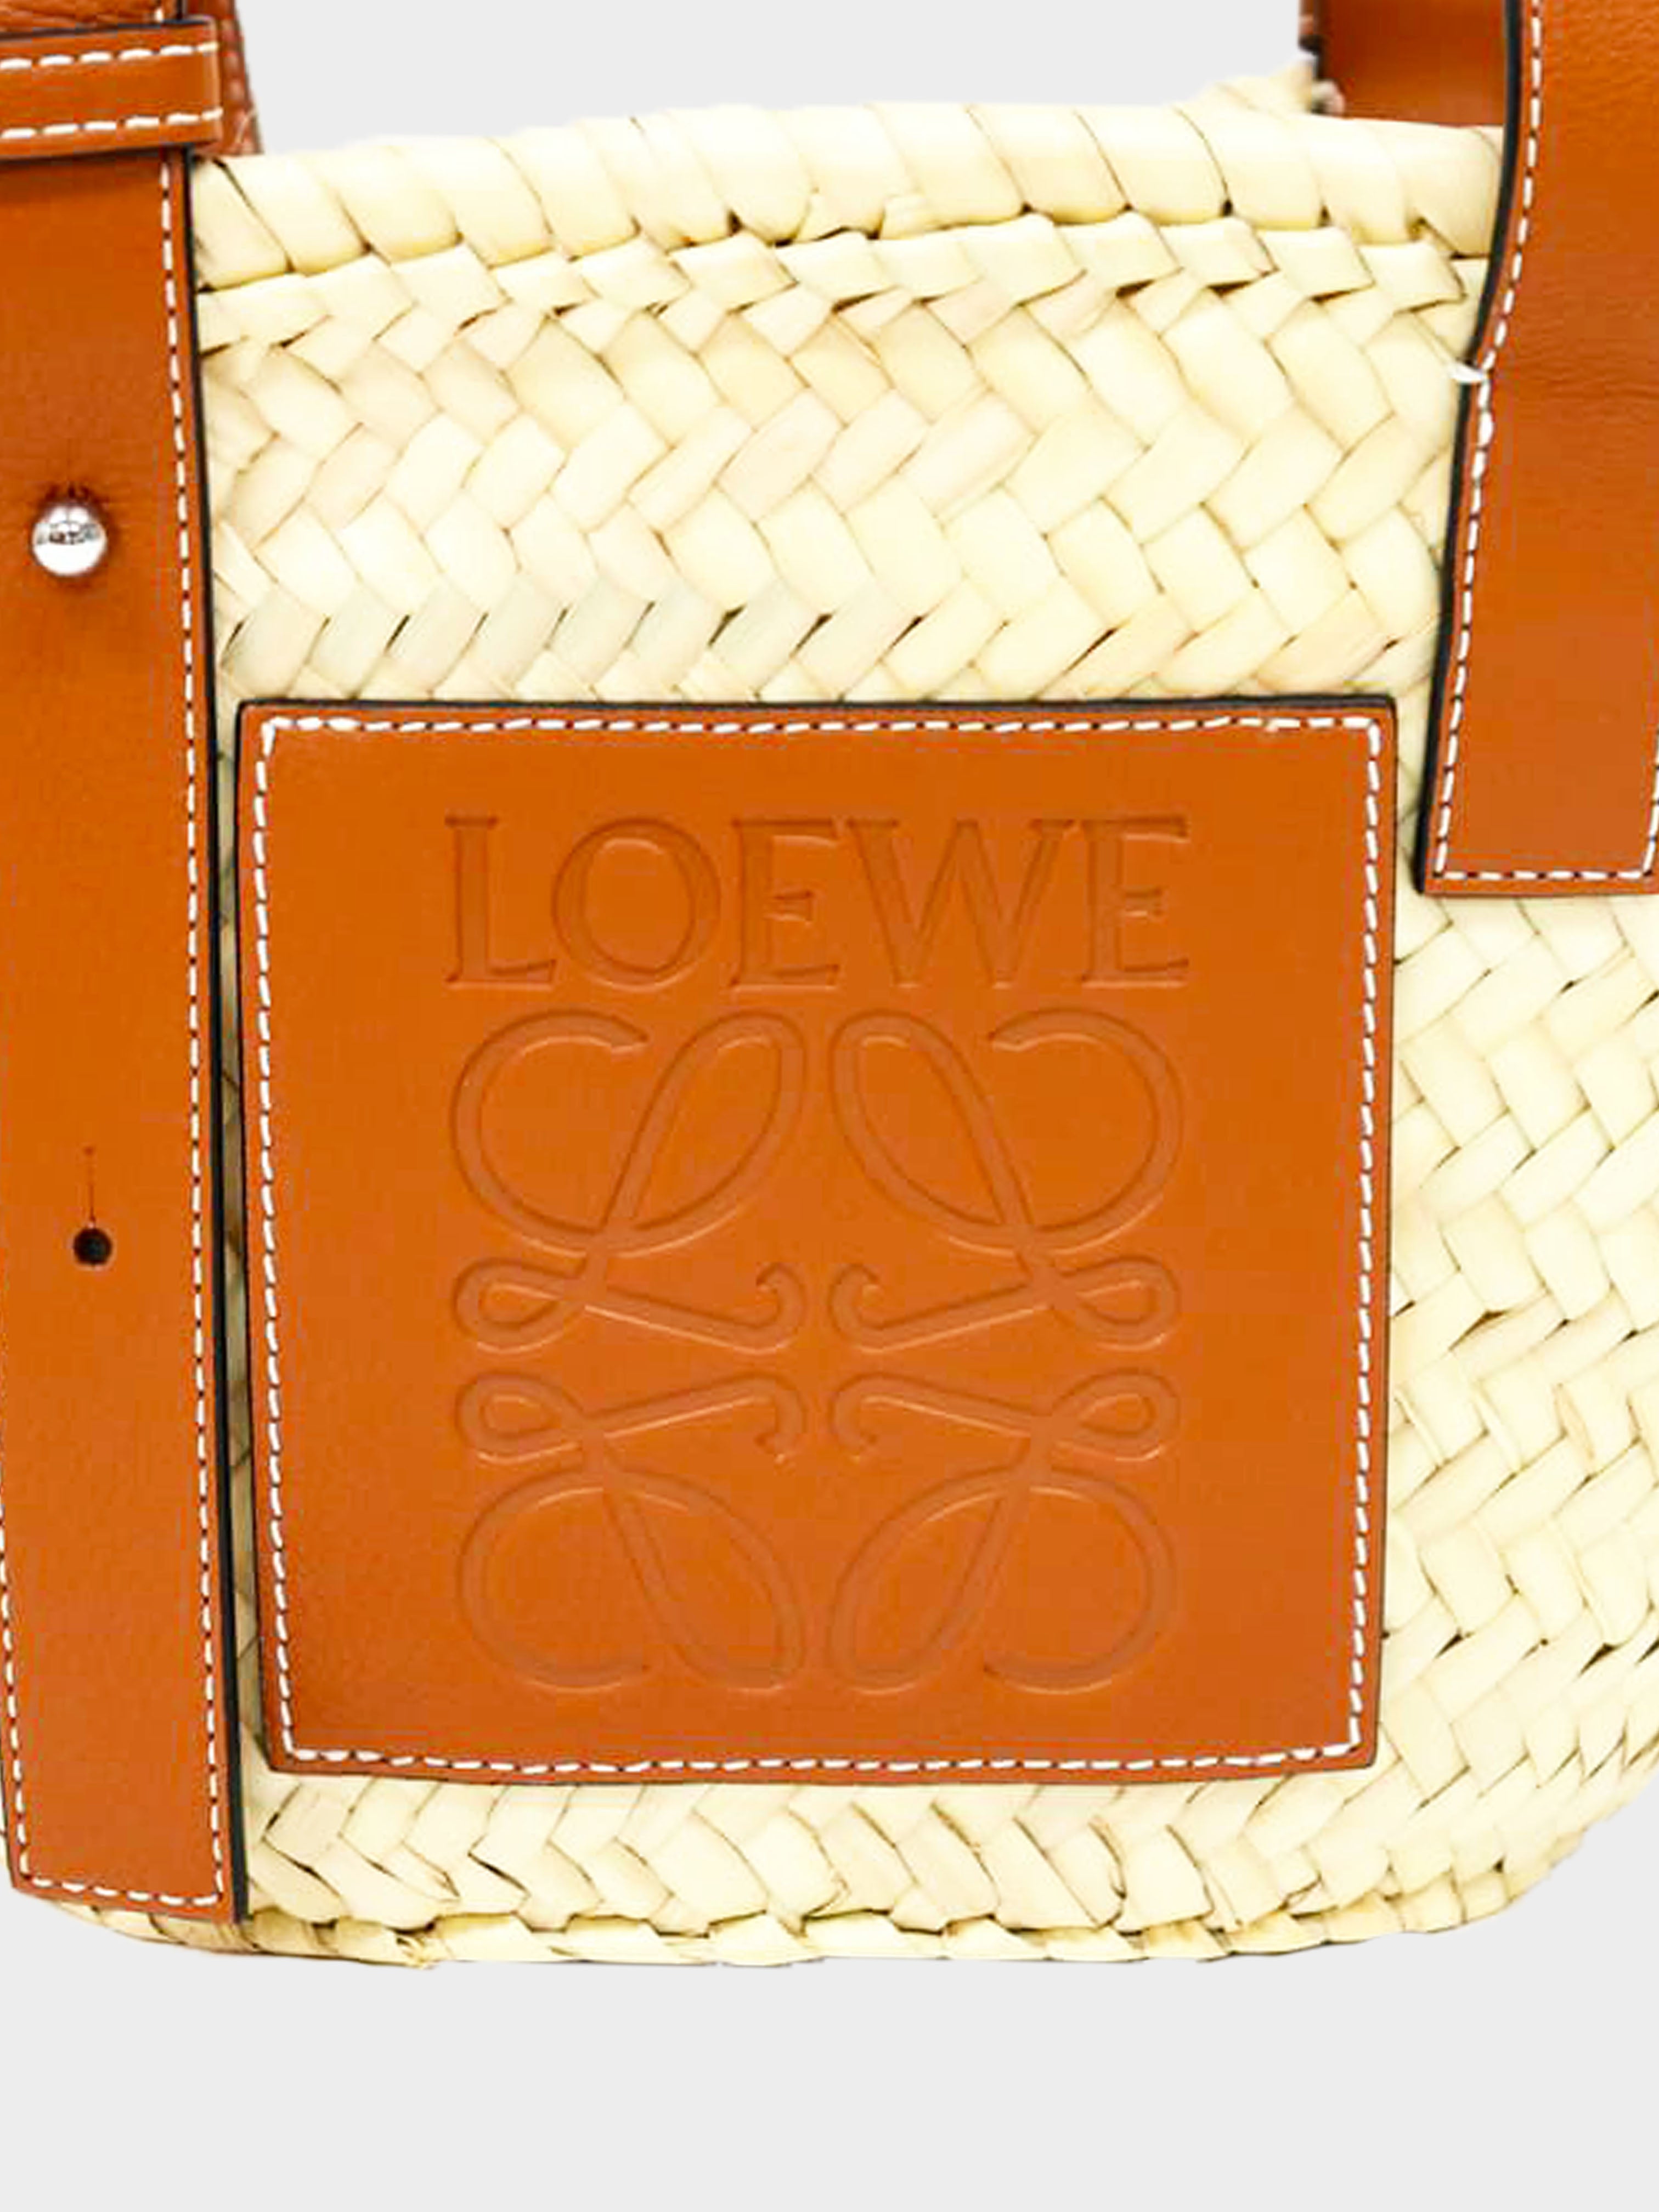 Loewe Braided Leather Bag Strap In Brown/yellow